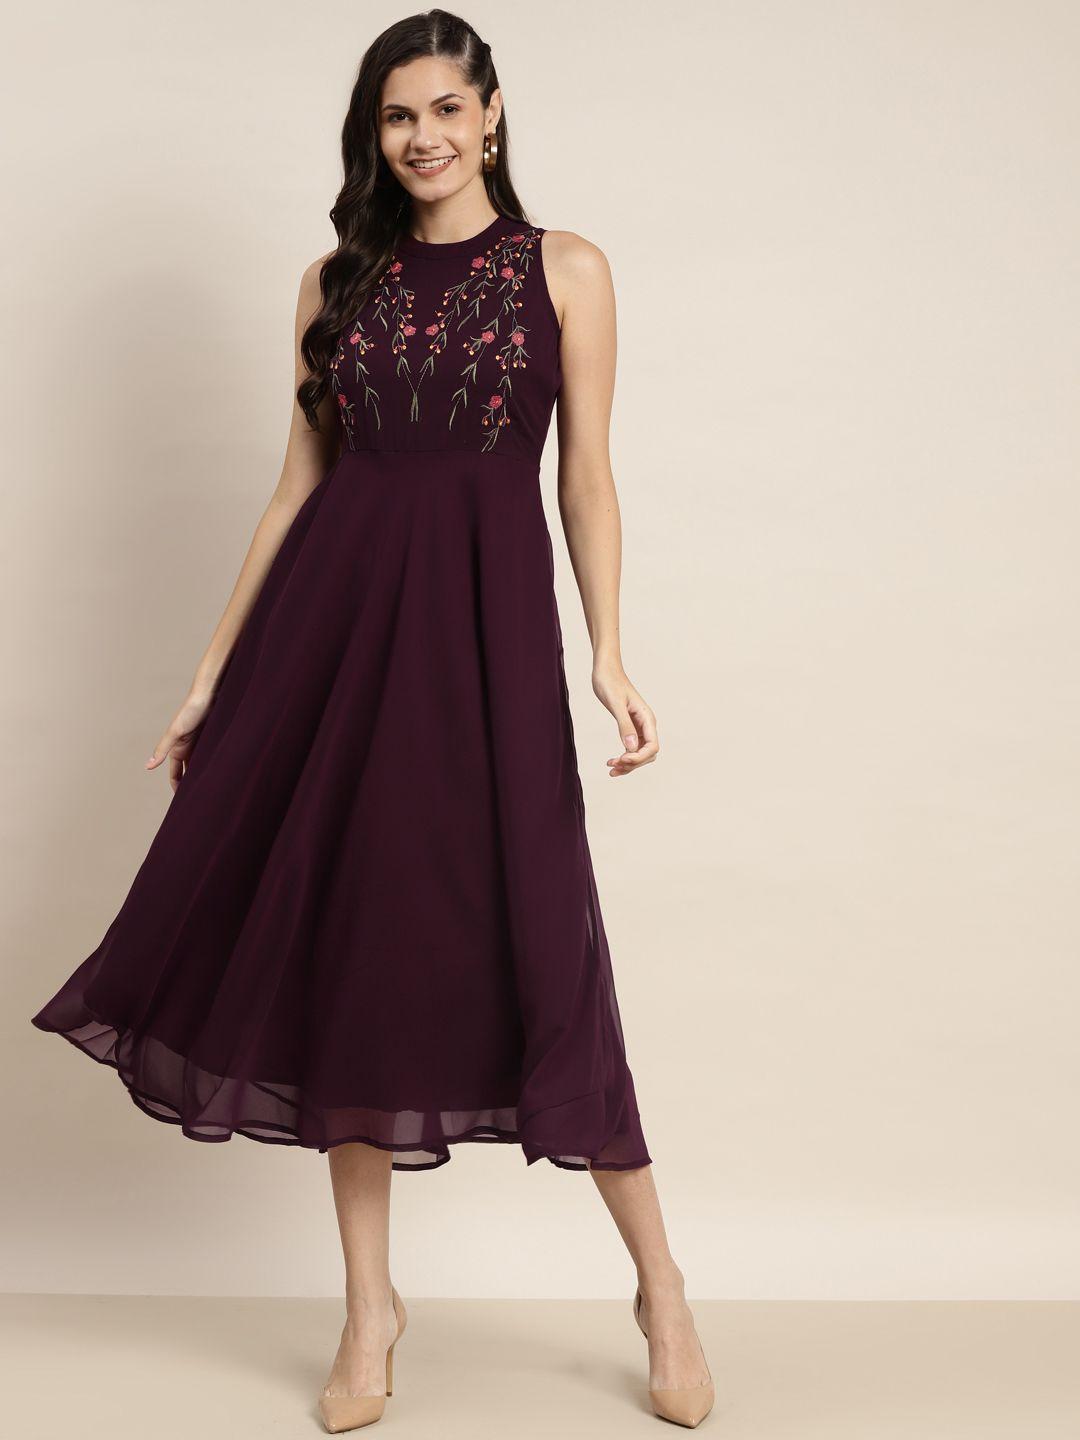 jompers purple & pink floral embroidered a-line midi dress